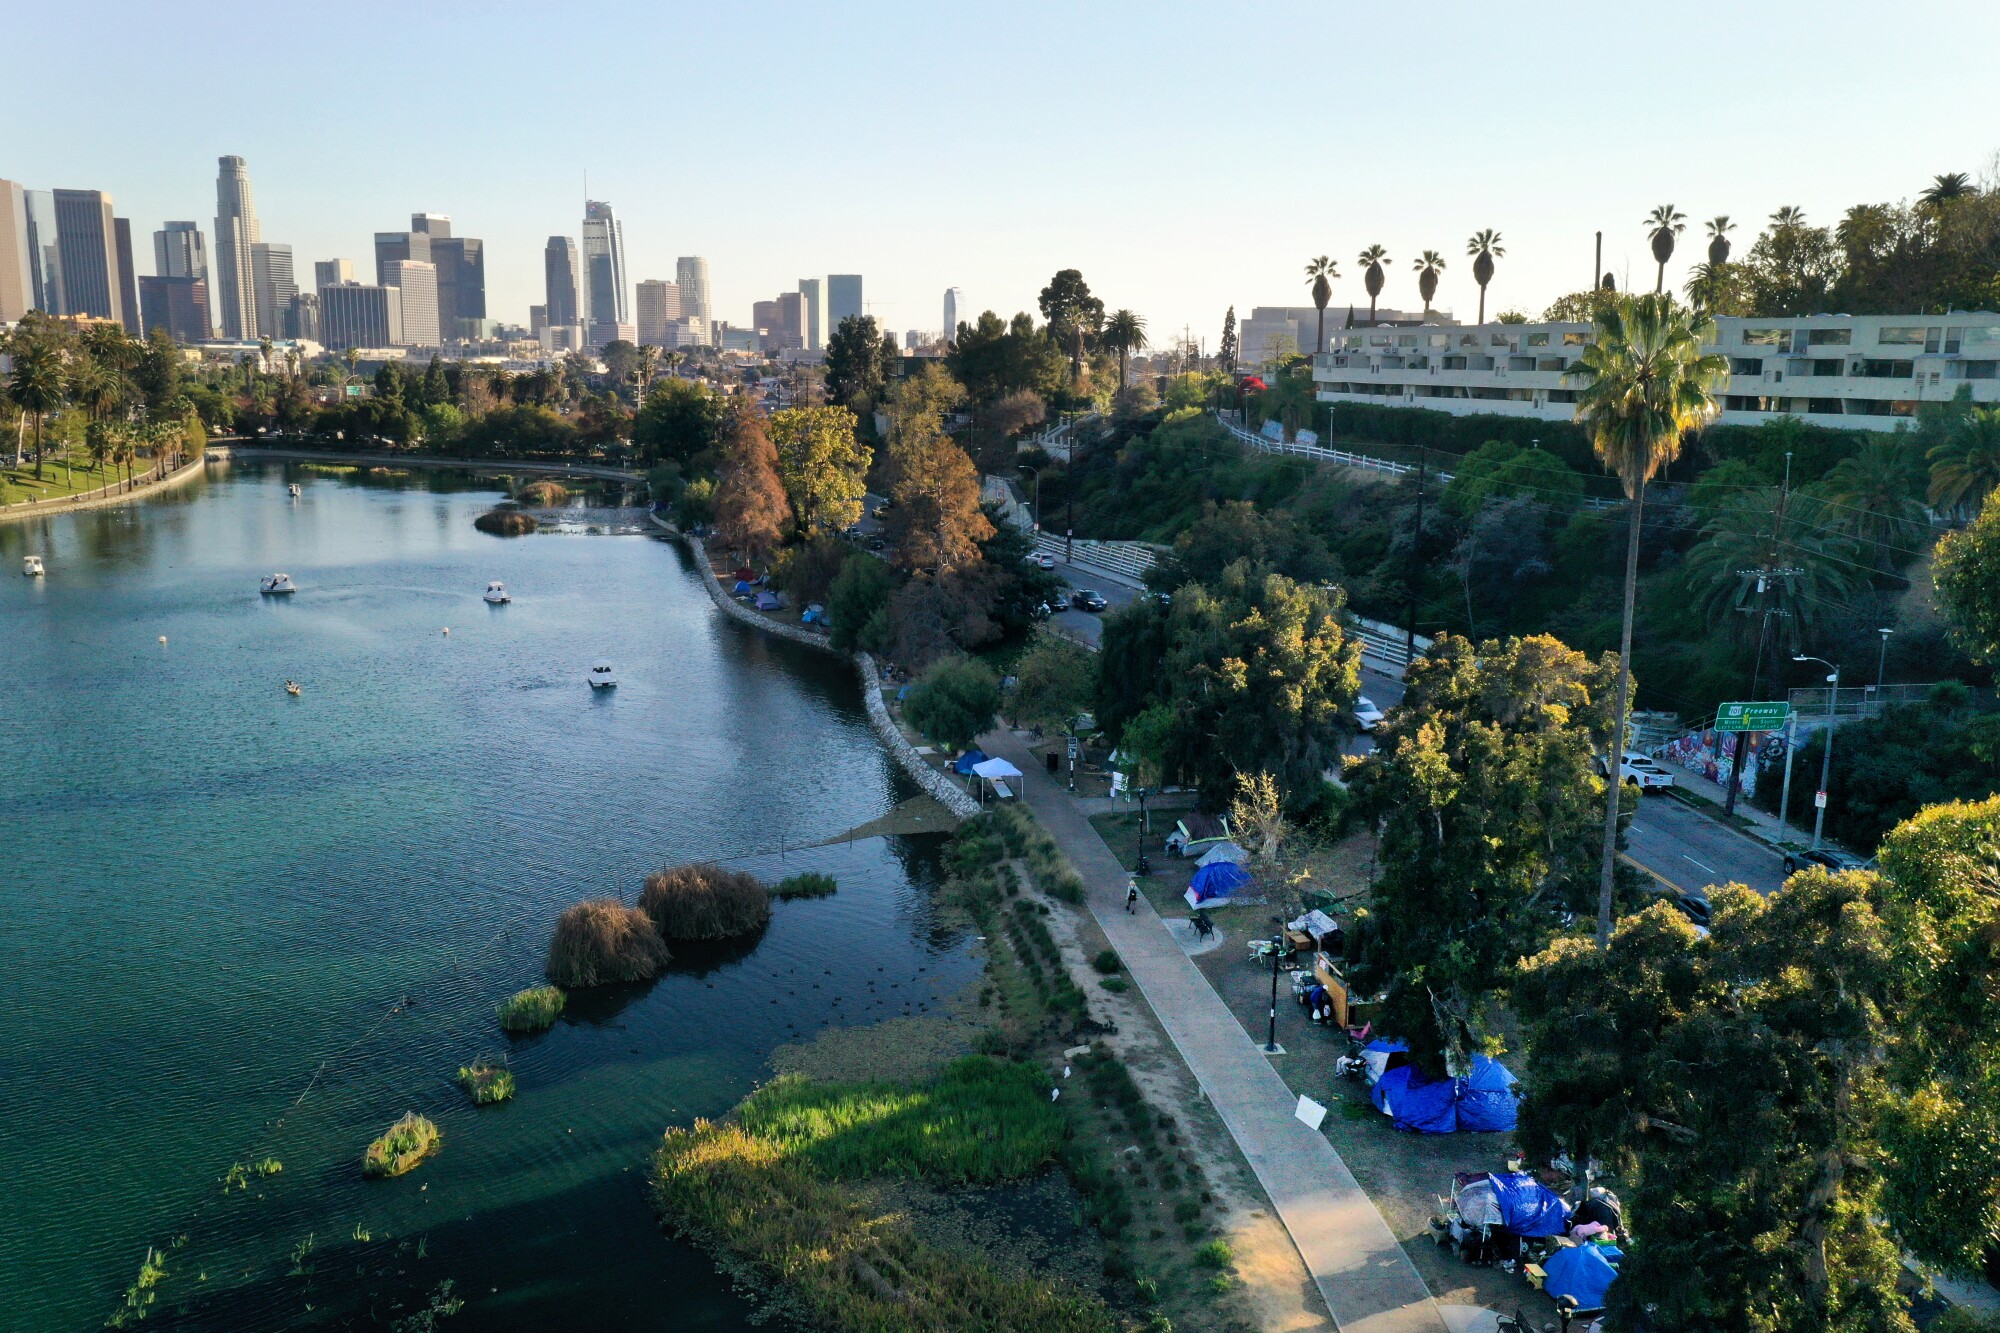 Aerial view of Echo Park Lake with blue tarps and tents visible